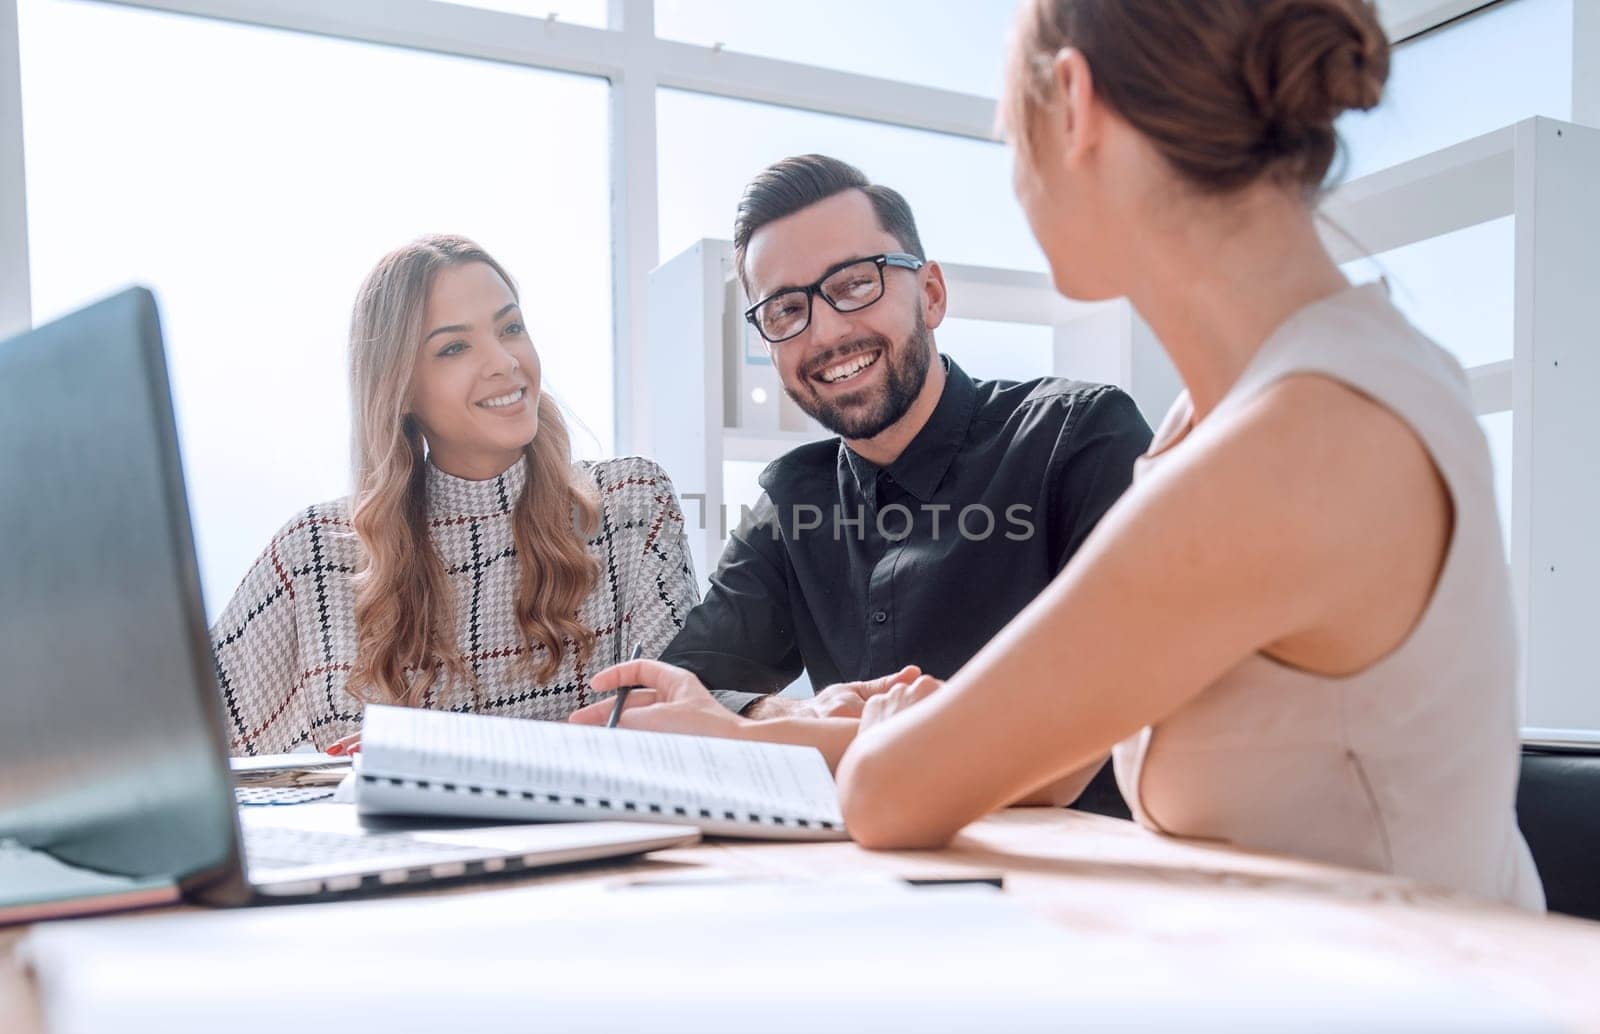 young business woman explaining her ideas at a business meeting. the concept of teamwork